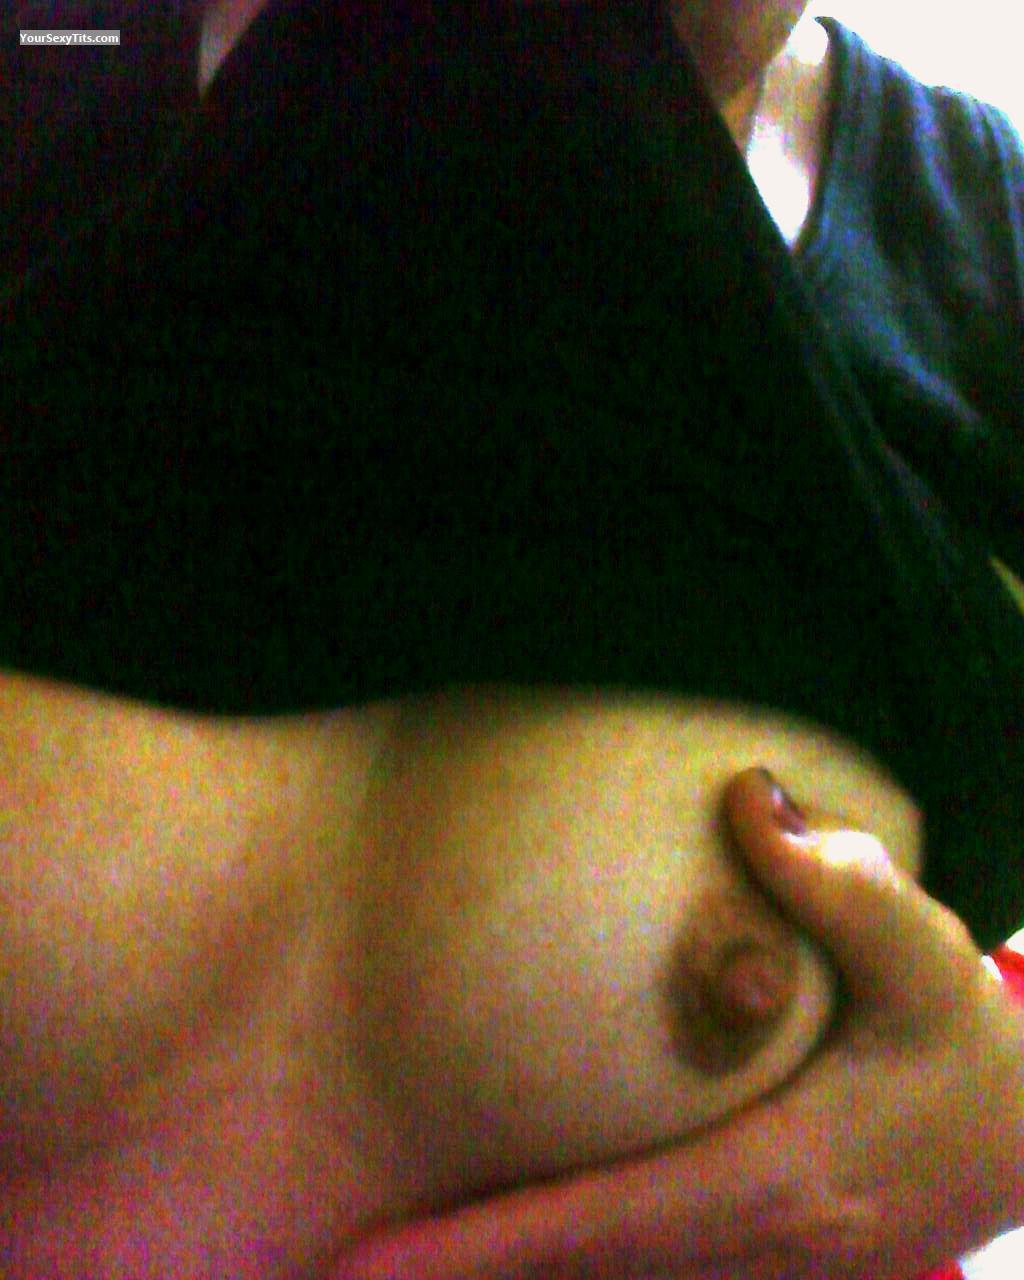 My Small Tits Selfie by Pepper